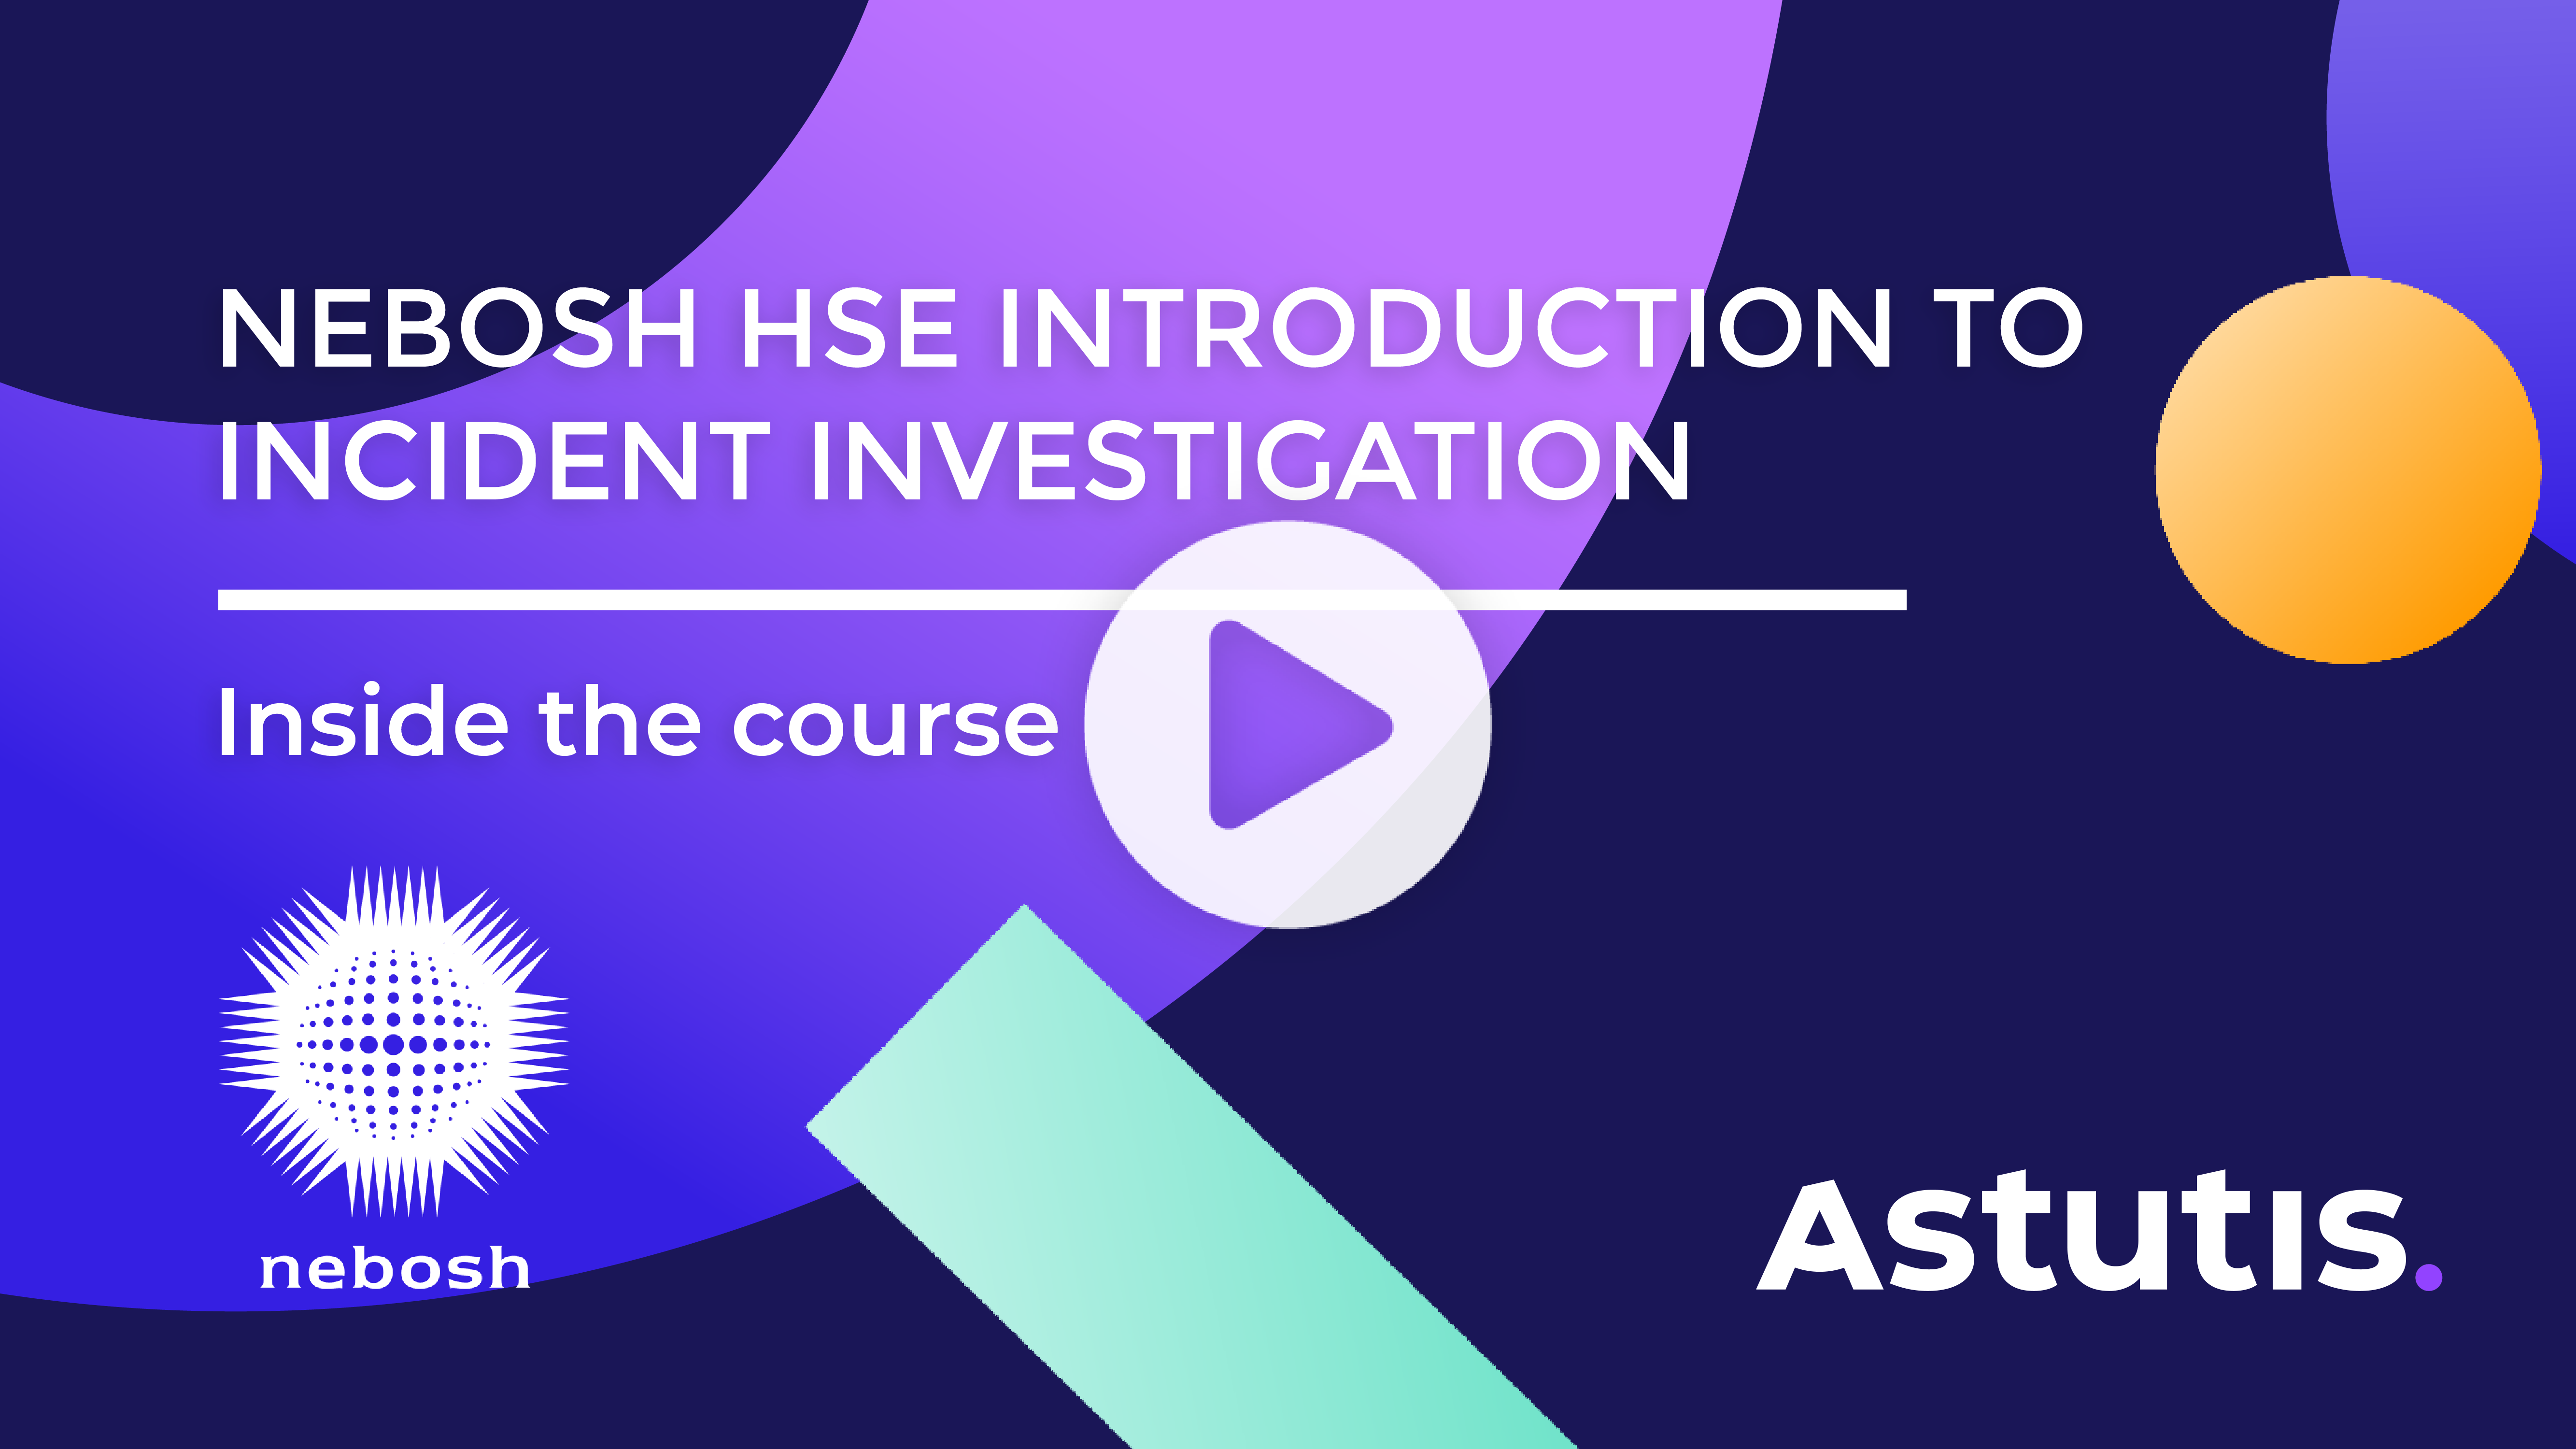 NEBOSH HSE Introduction to Incident Investigation Online Course | Astutis